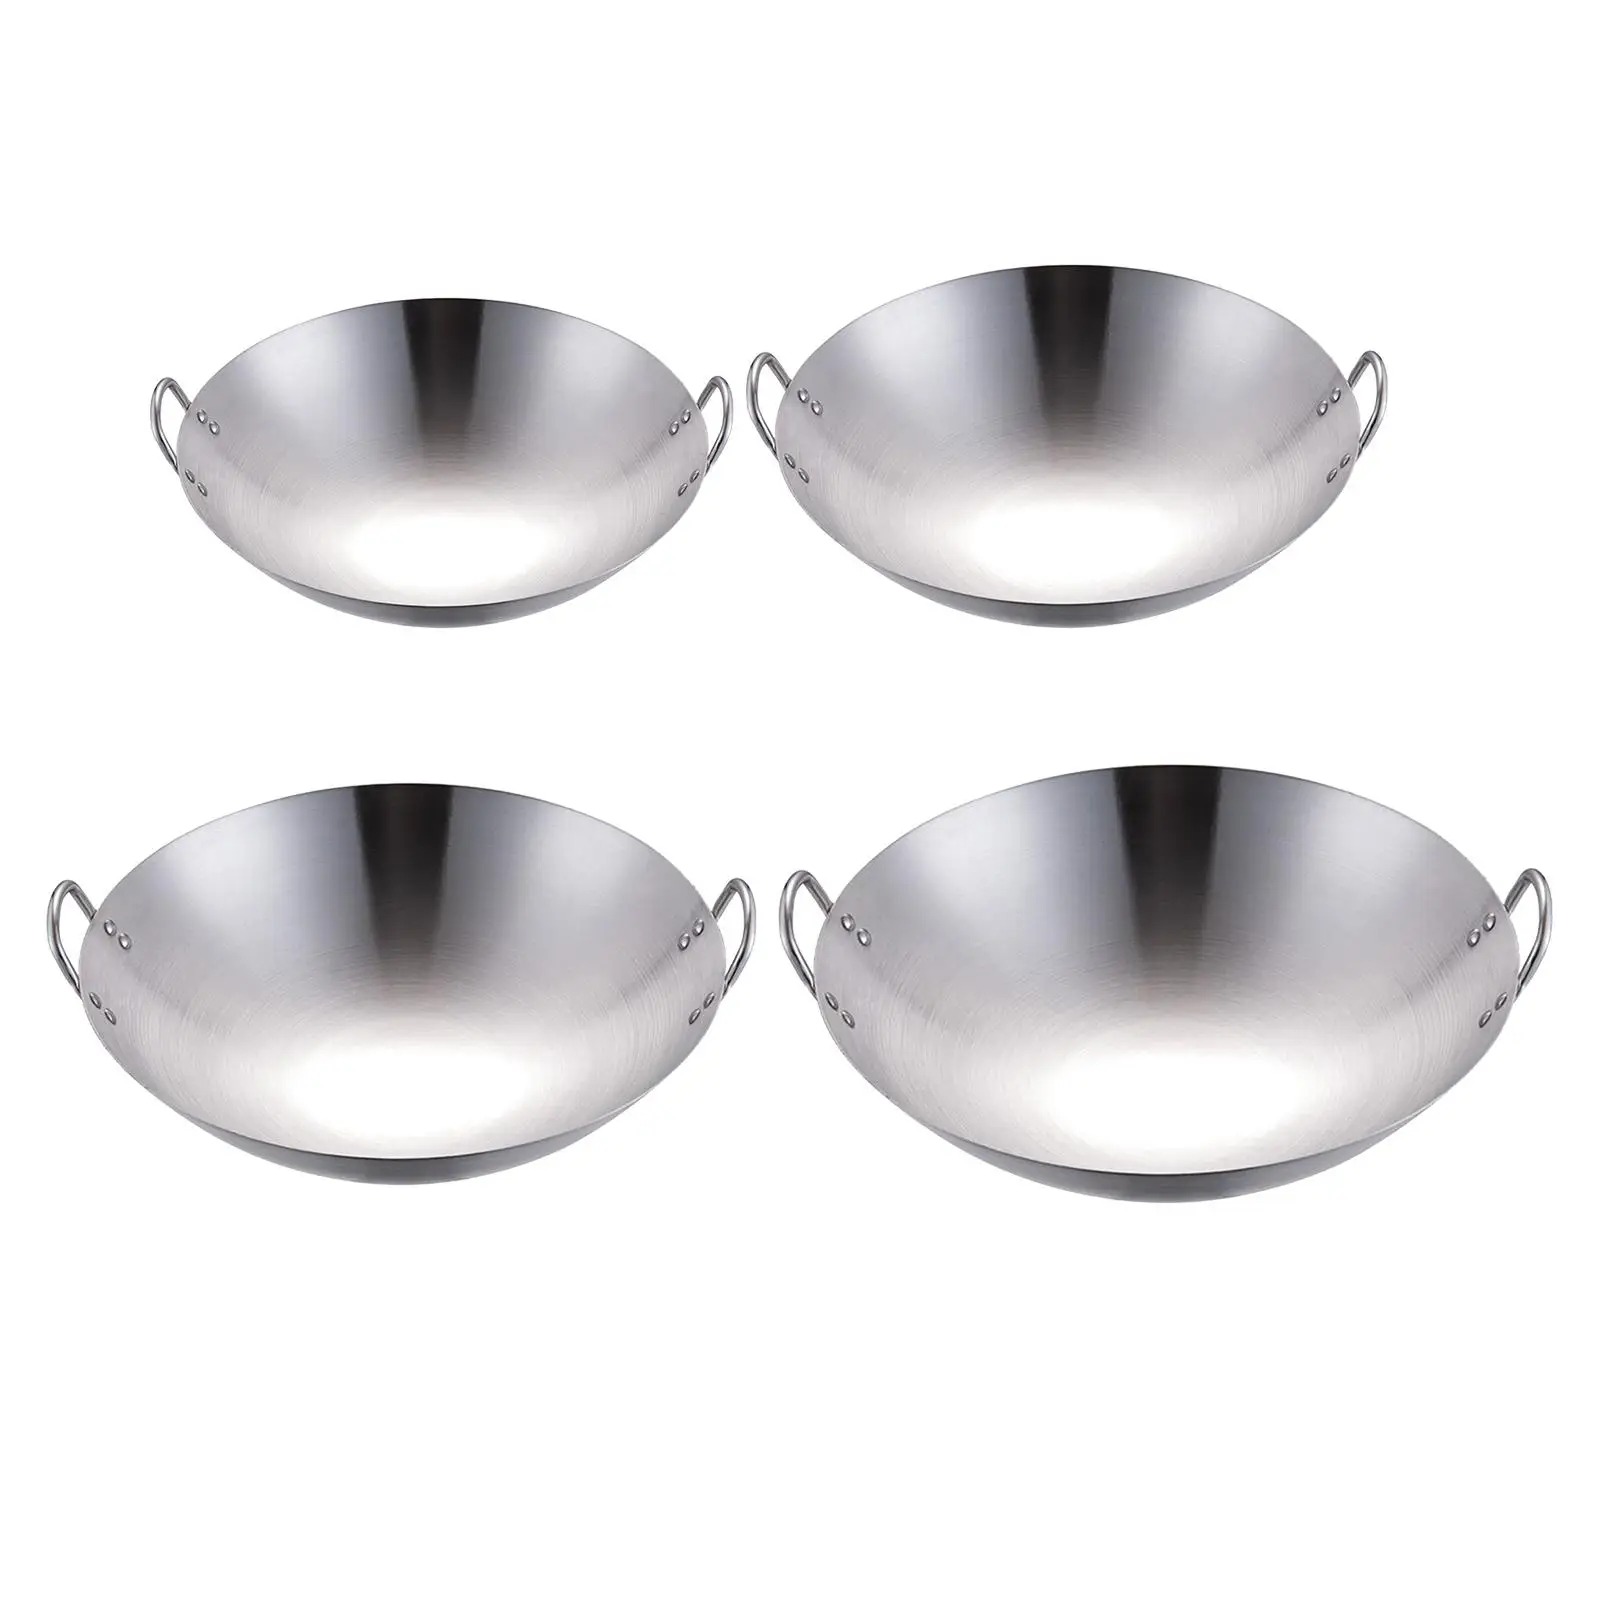 Steel Round Bottom Wok Dual Handle Frying Fry Pot for Cooking Eggs,Sausages, Fish